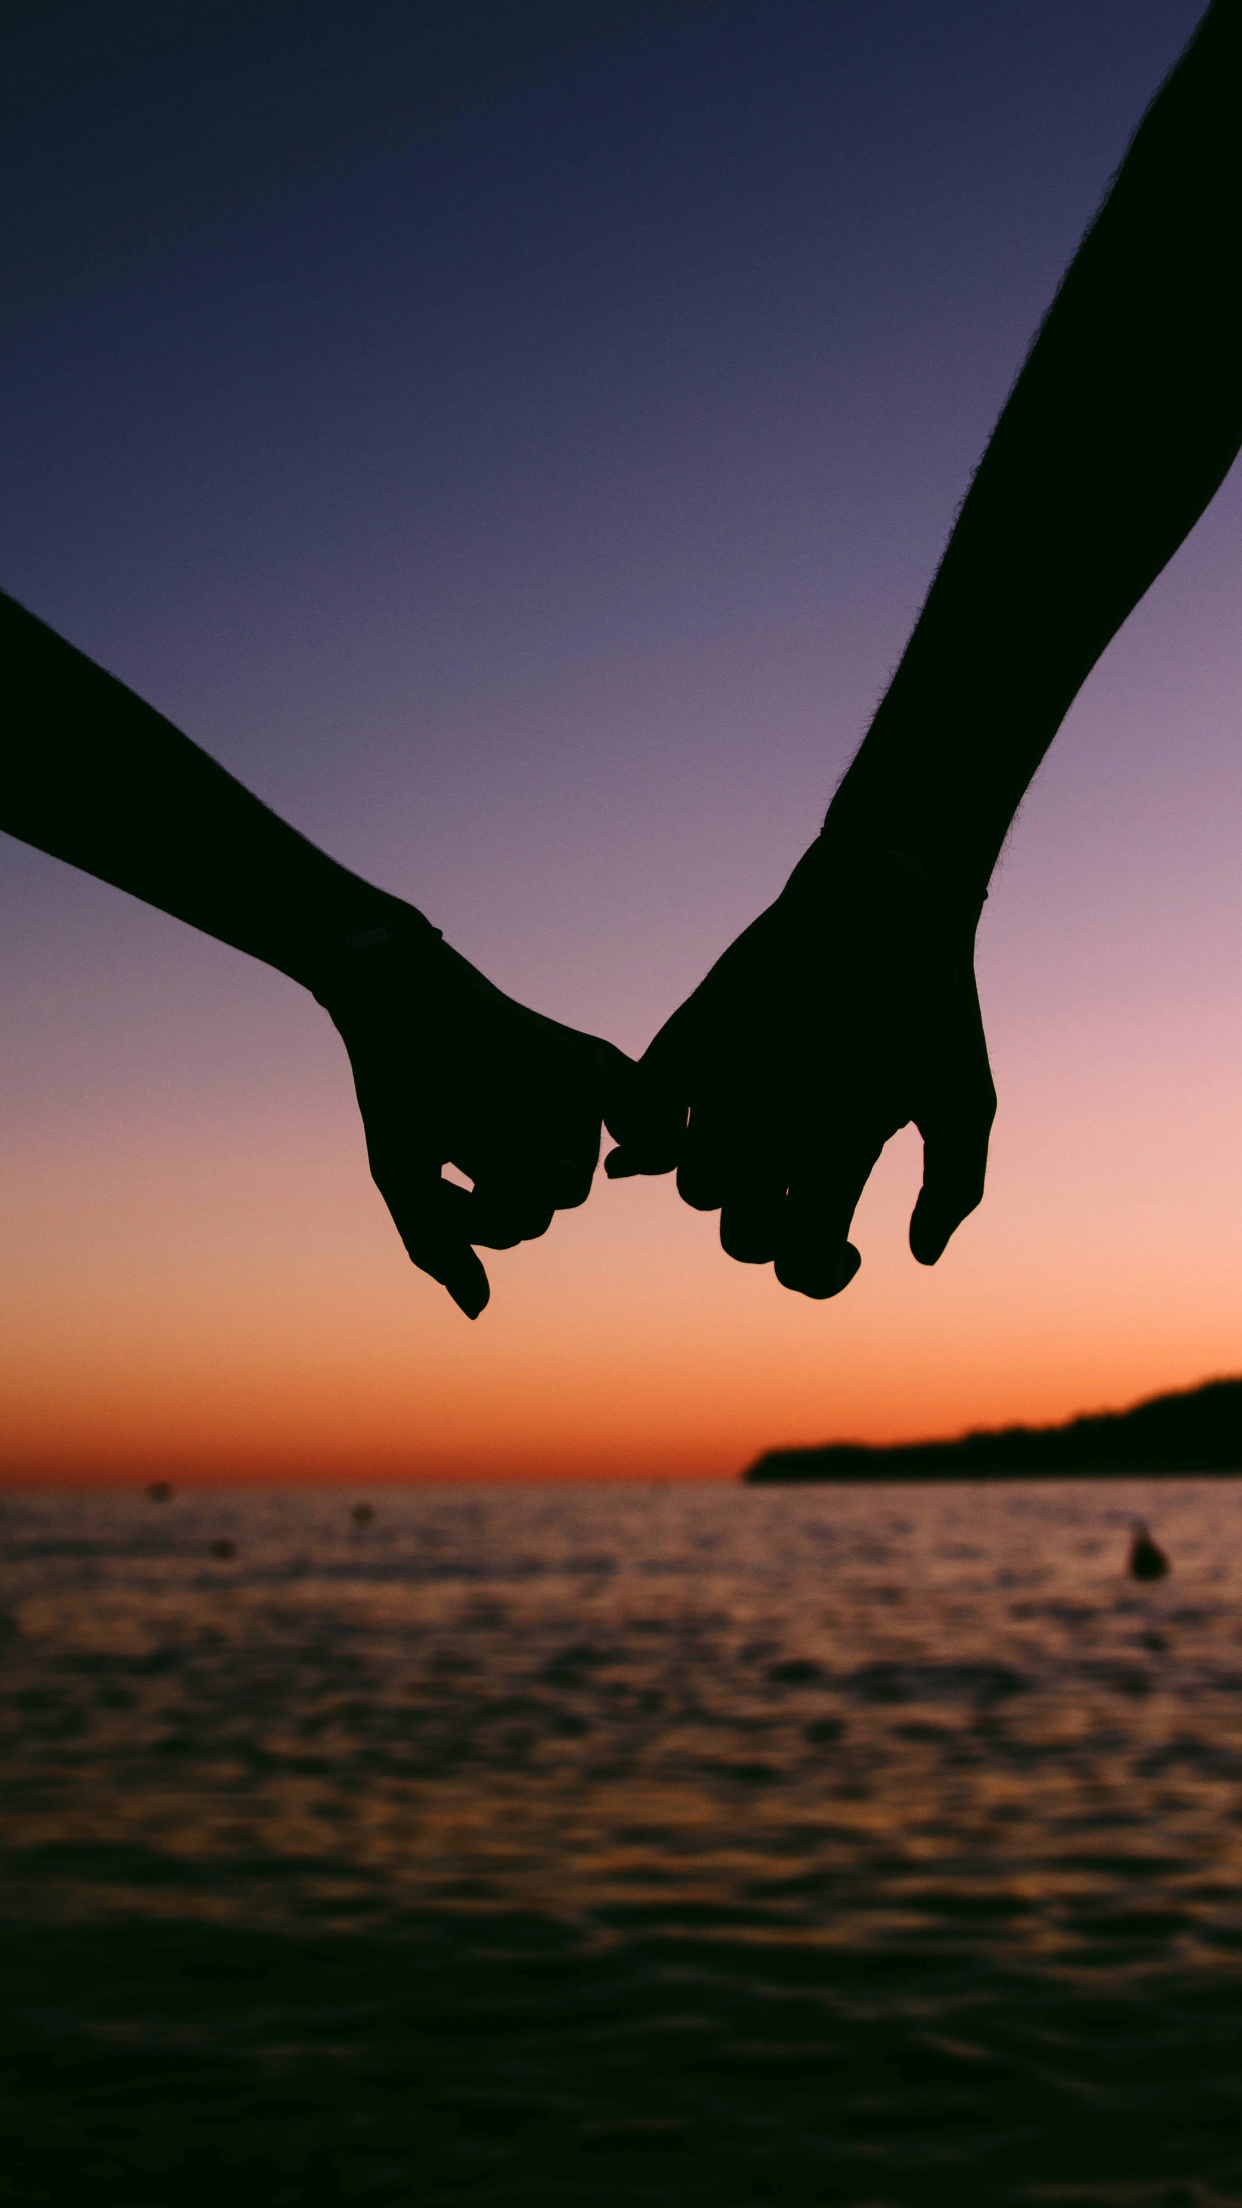 Hands together Wallpaper 4K, Couple, Silhouette, Sunset